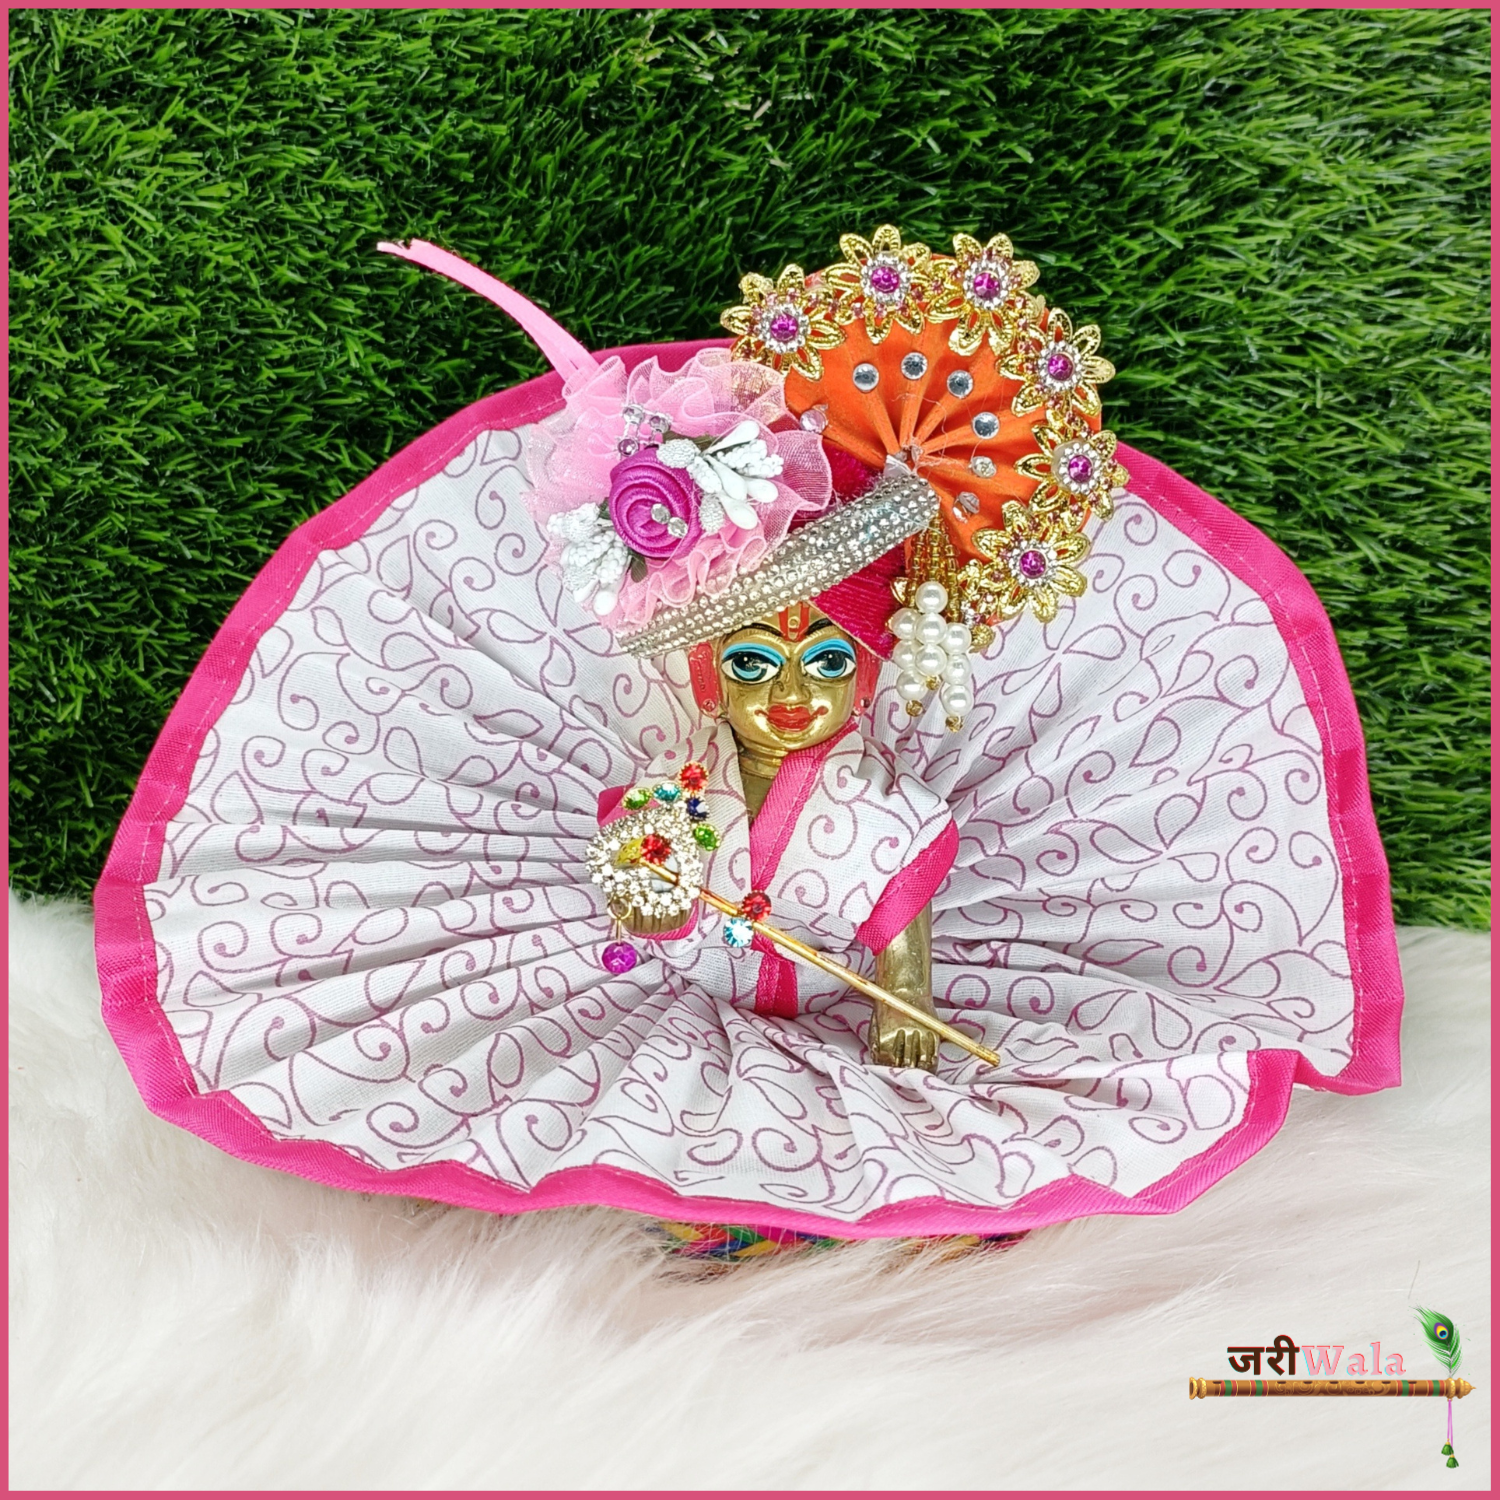 Buy Net Fabric Flower Ladoo Gopal Dress (Pink, Size 7) Online at Low Prices  in India - Amazon.in